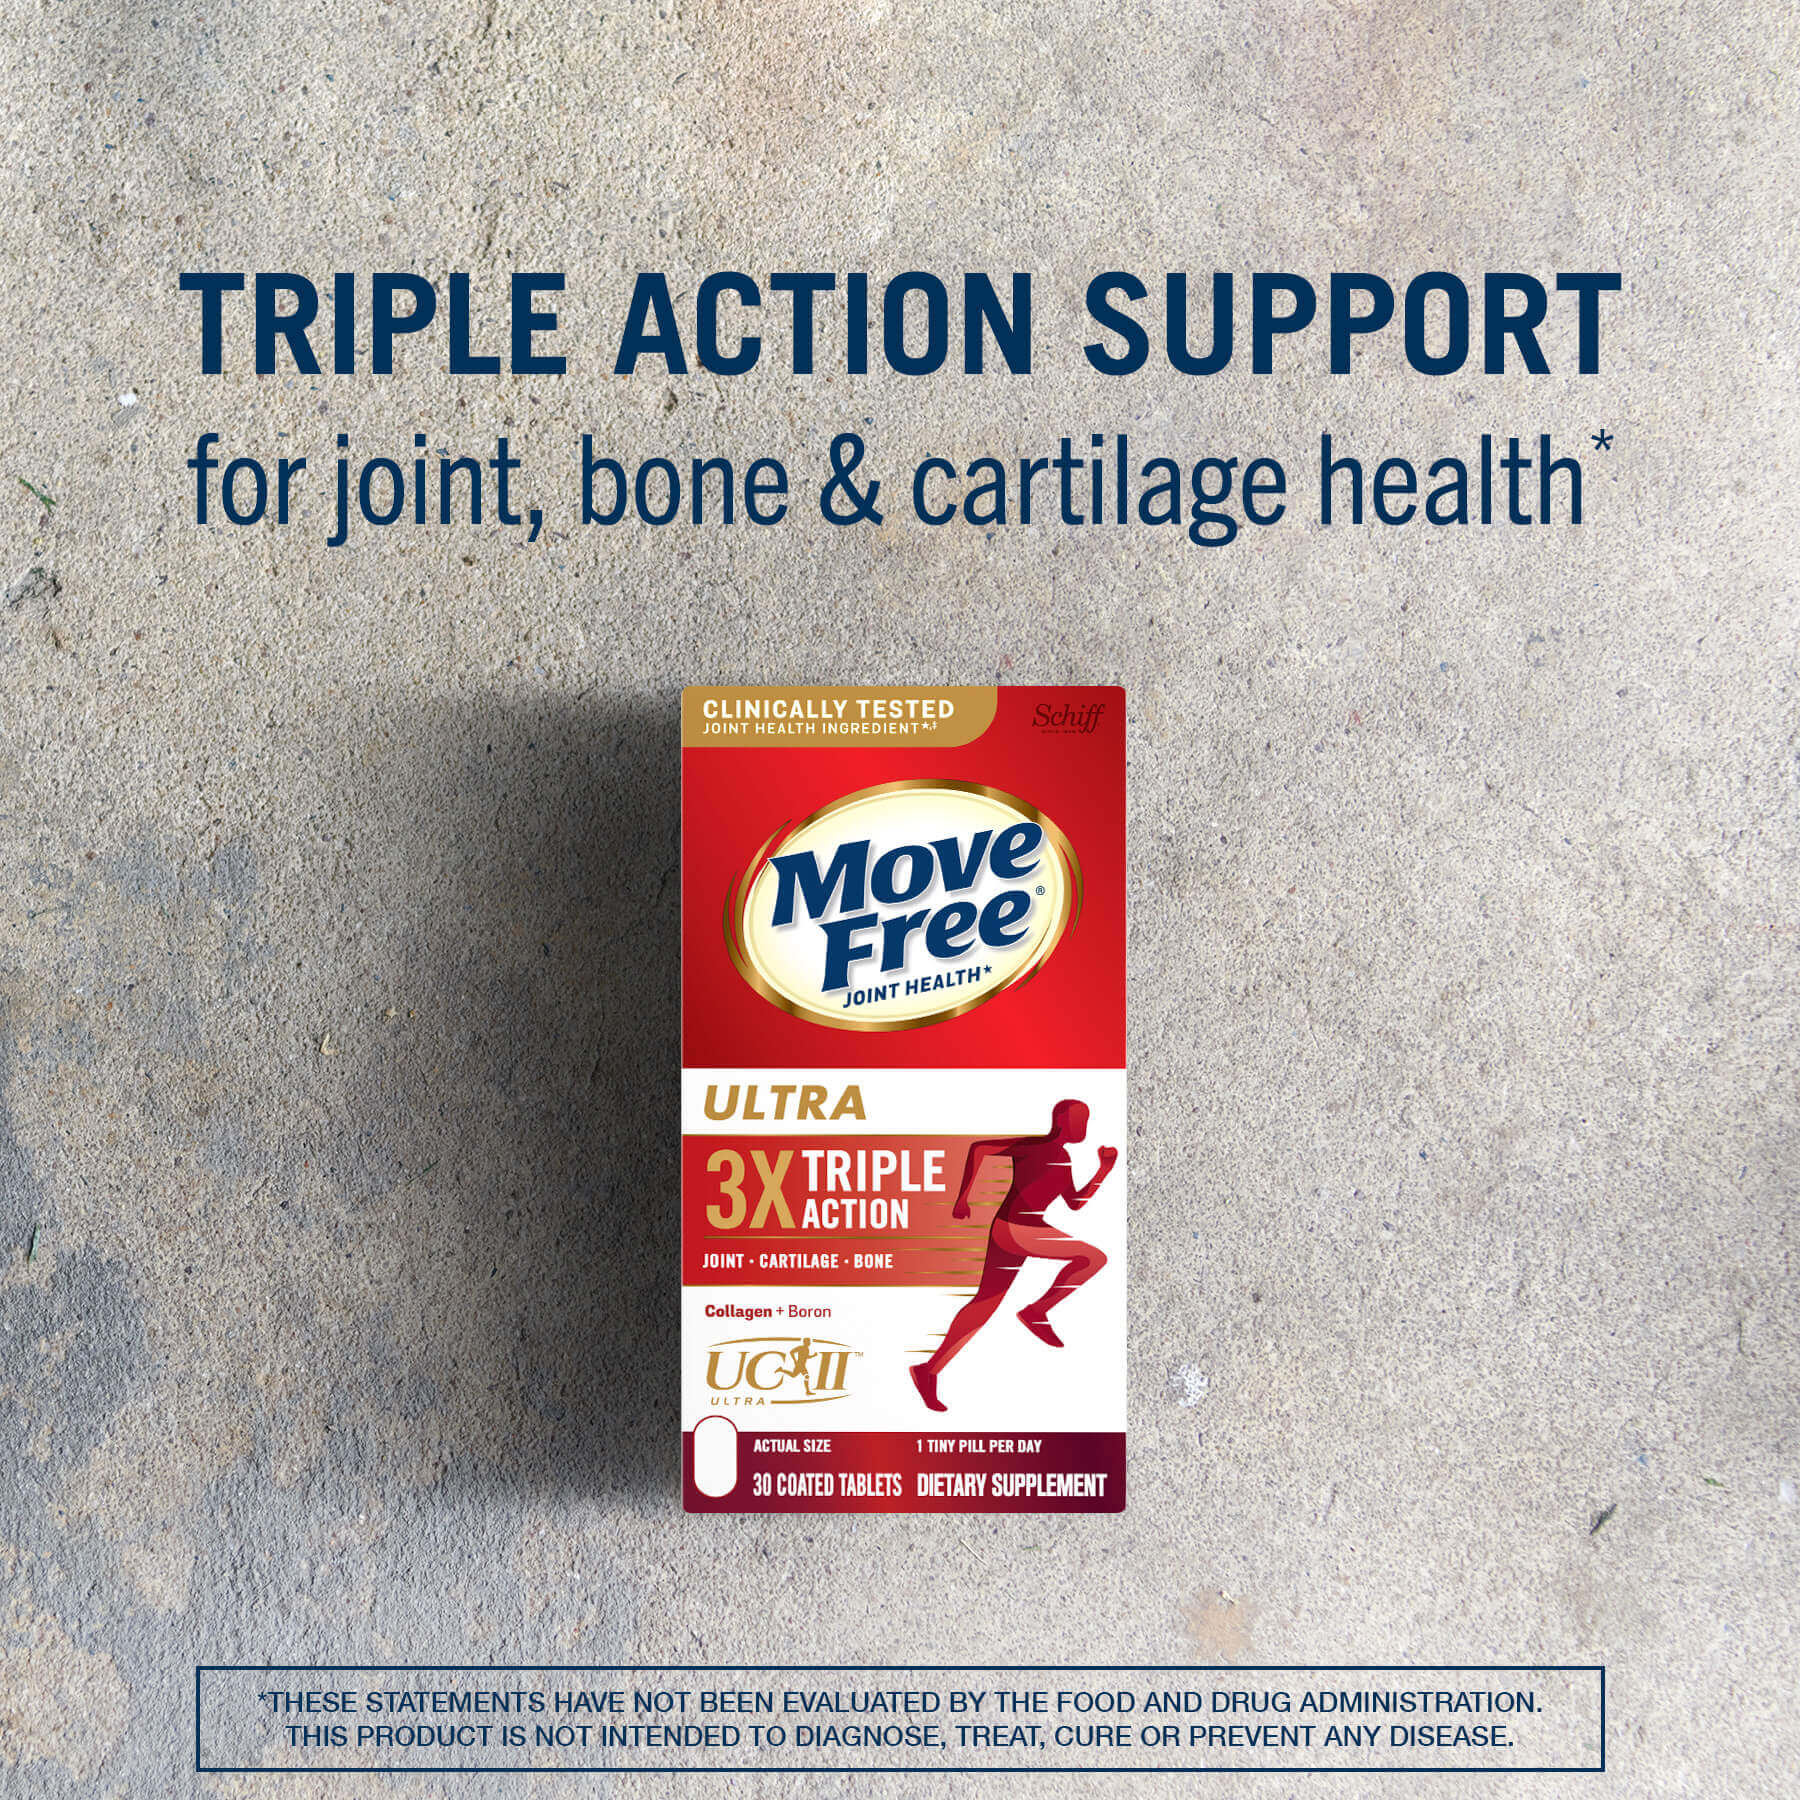 Move Free Ultra Triple Action Dietary Supplement Tablets, 75 ct.